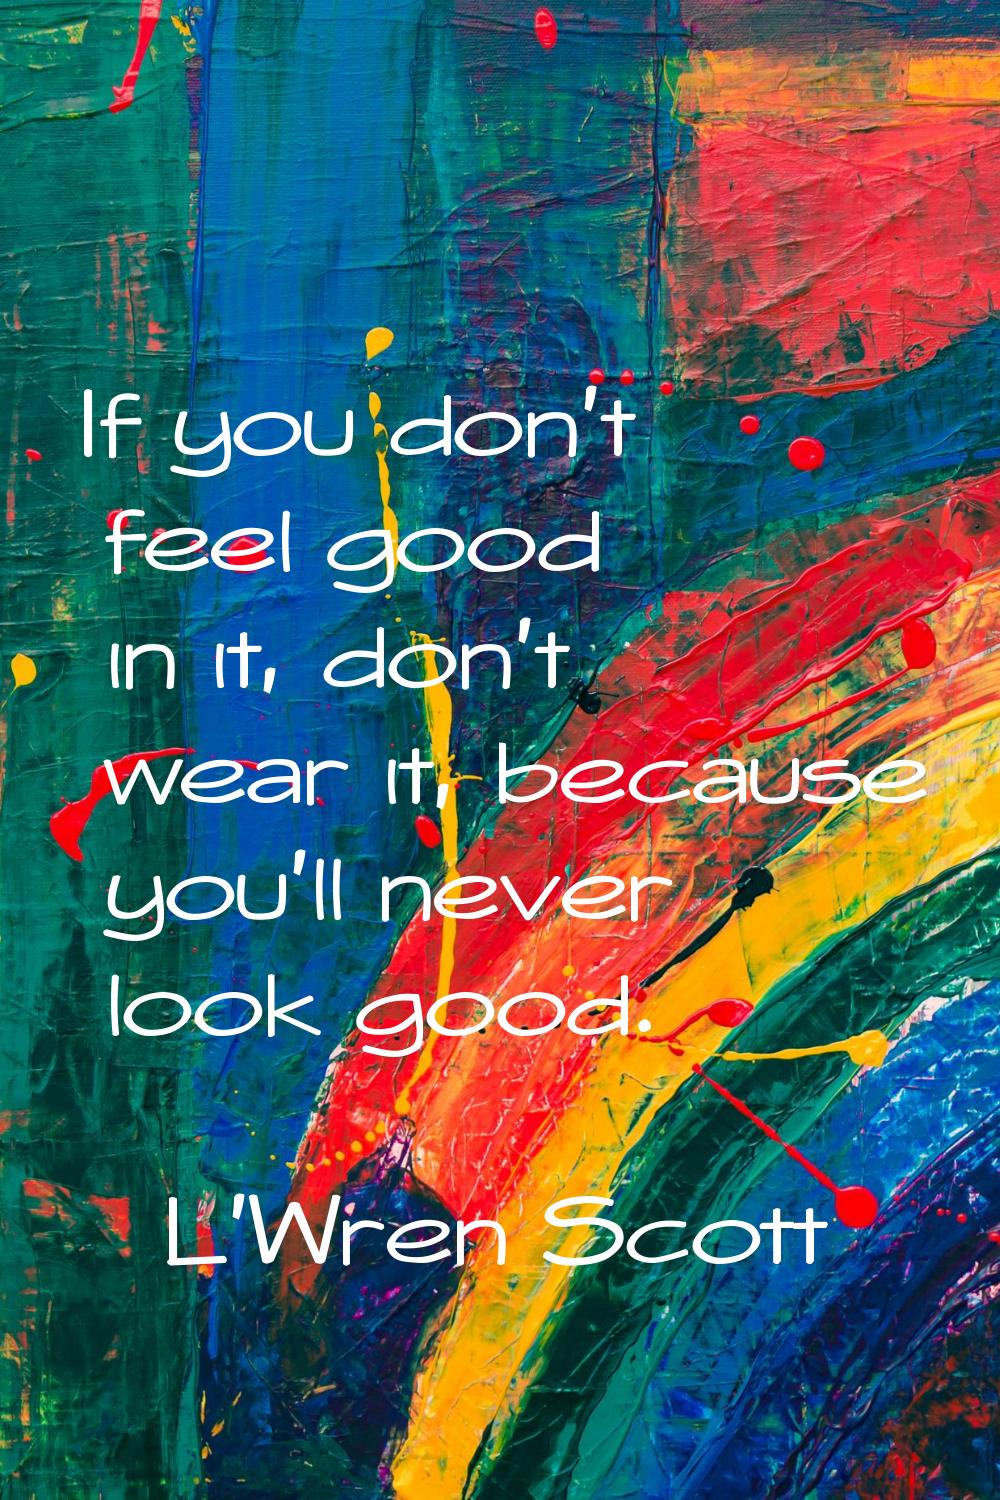 If you don't feel good in it, don't wear it, because you'll never look good.